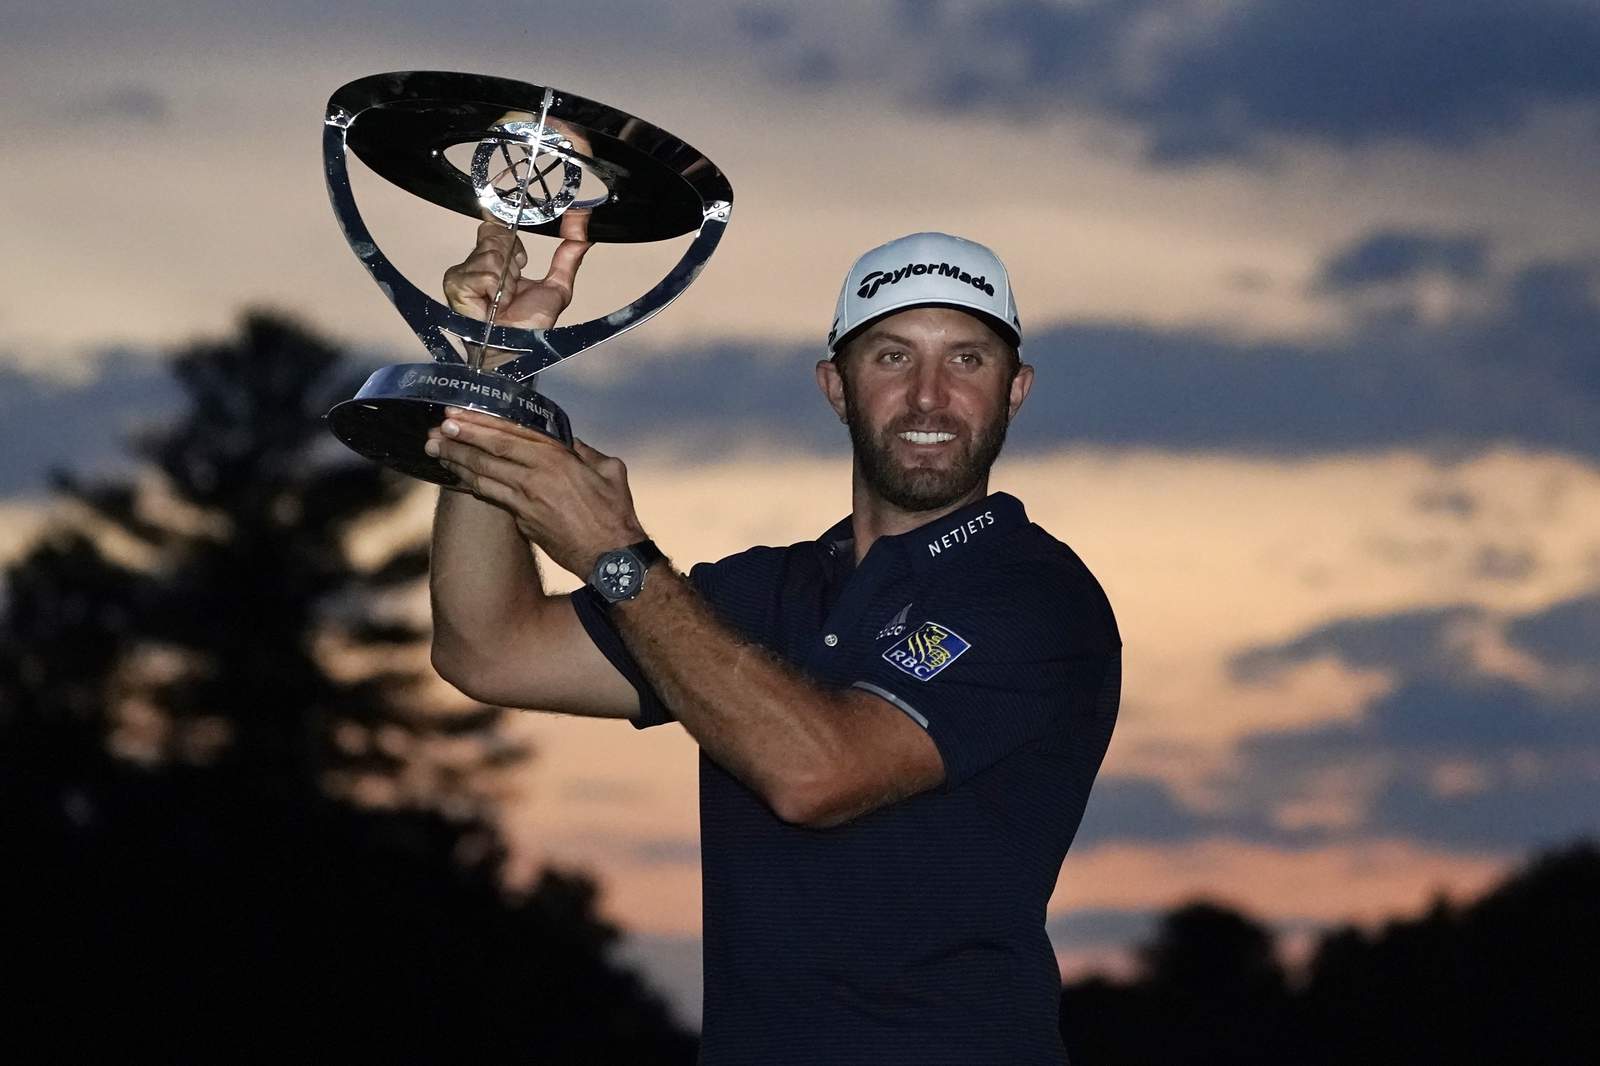 Dustin Johnson wins by 11 shots and is back to No. 1